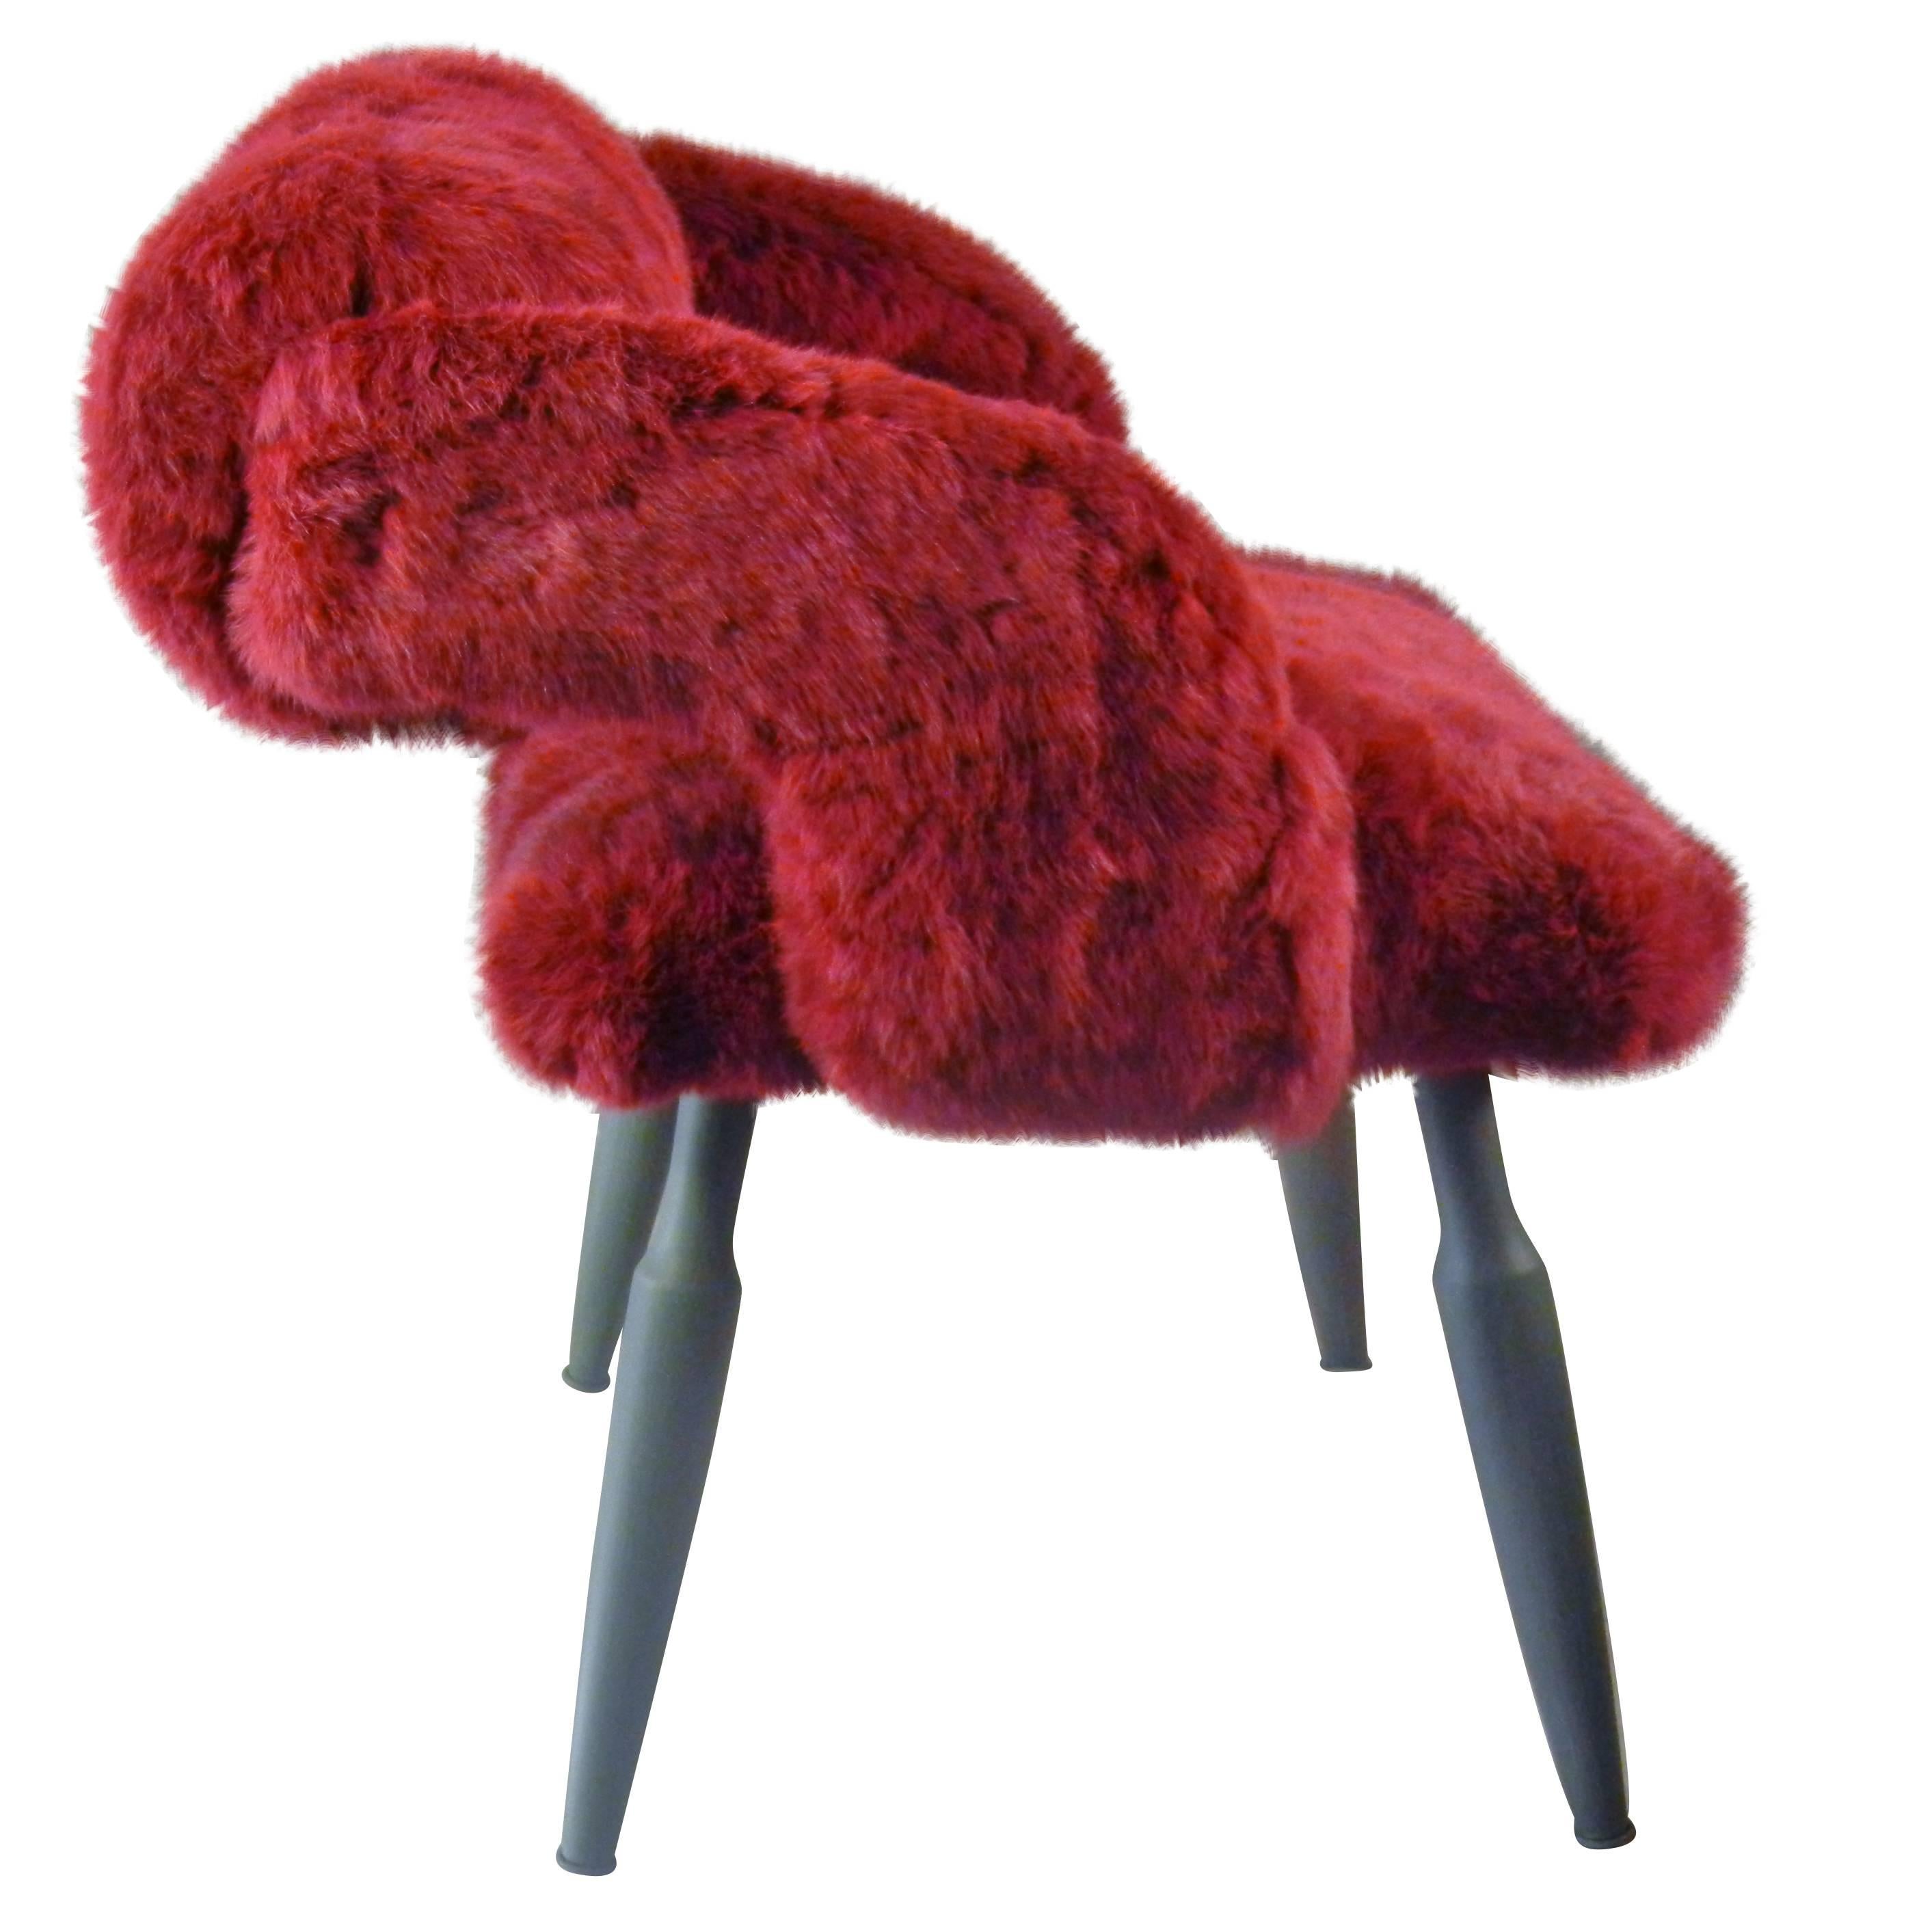 This signed, artist-designed chair is by Rodrigo Velasquez Godoy, a Montreal--based contemporary sculptor, painter and designer. Here he used a Mid-Century vanity chair to create a one-of-a-kind boudoir chair upholstered in fuchsia-dyed rabbit fur